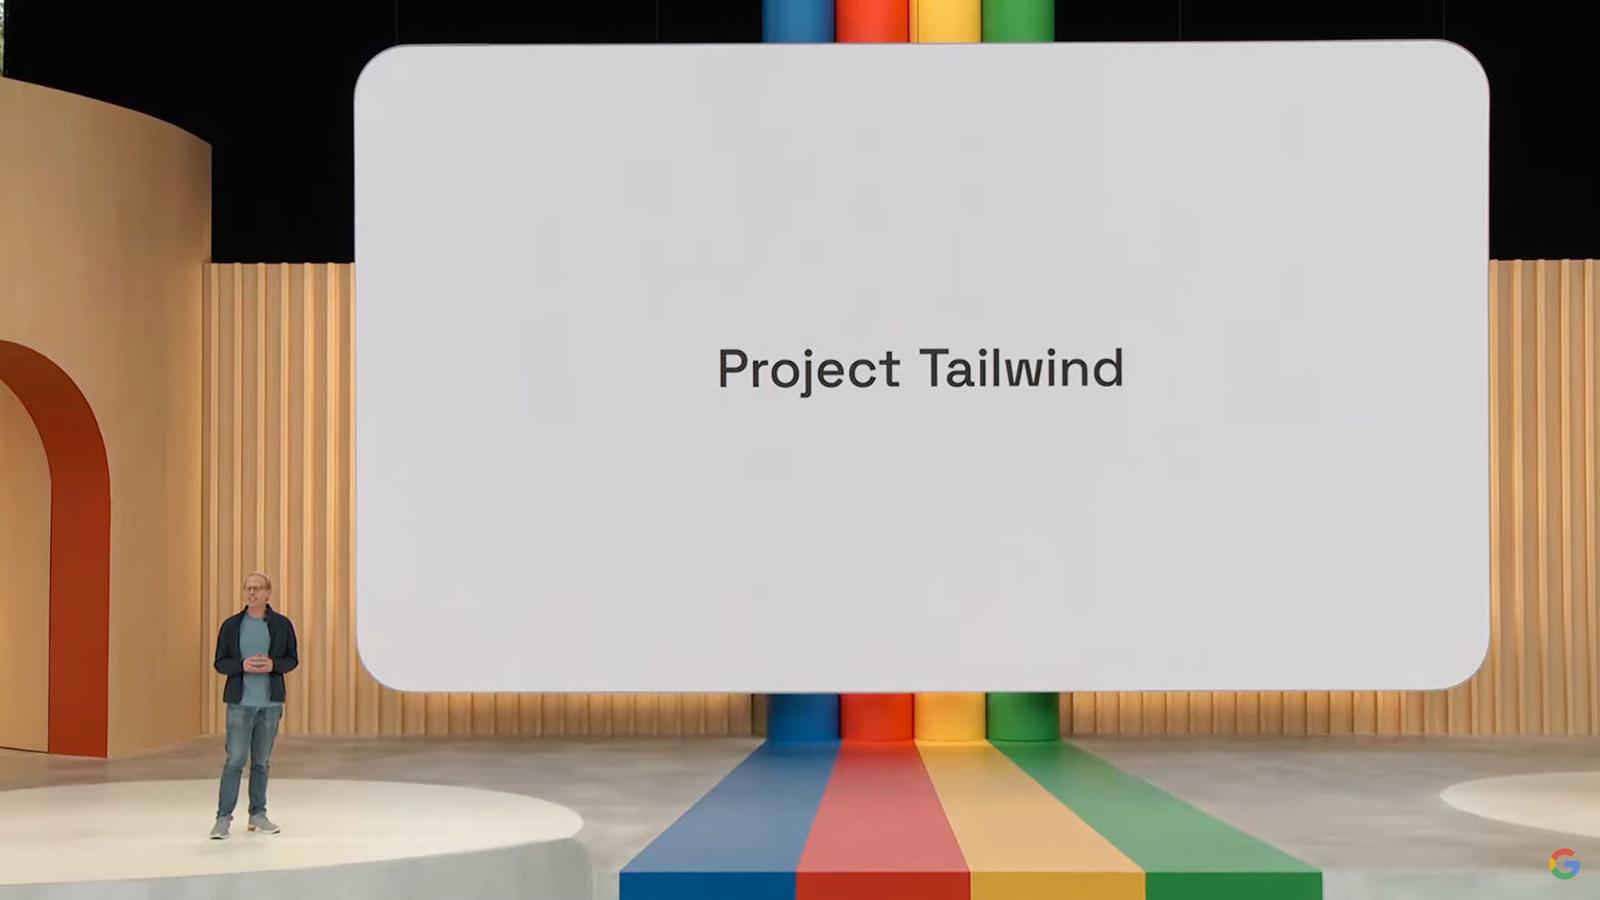 With Project Tailwind, Google is using AI to make note-taking smarter